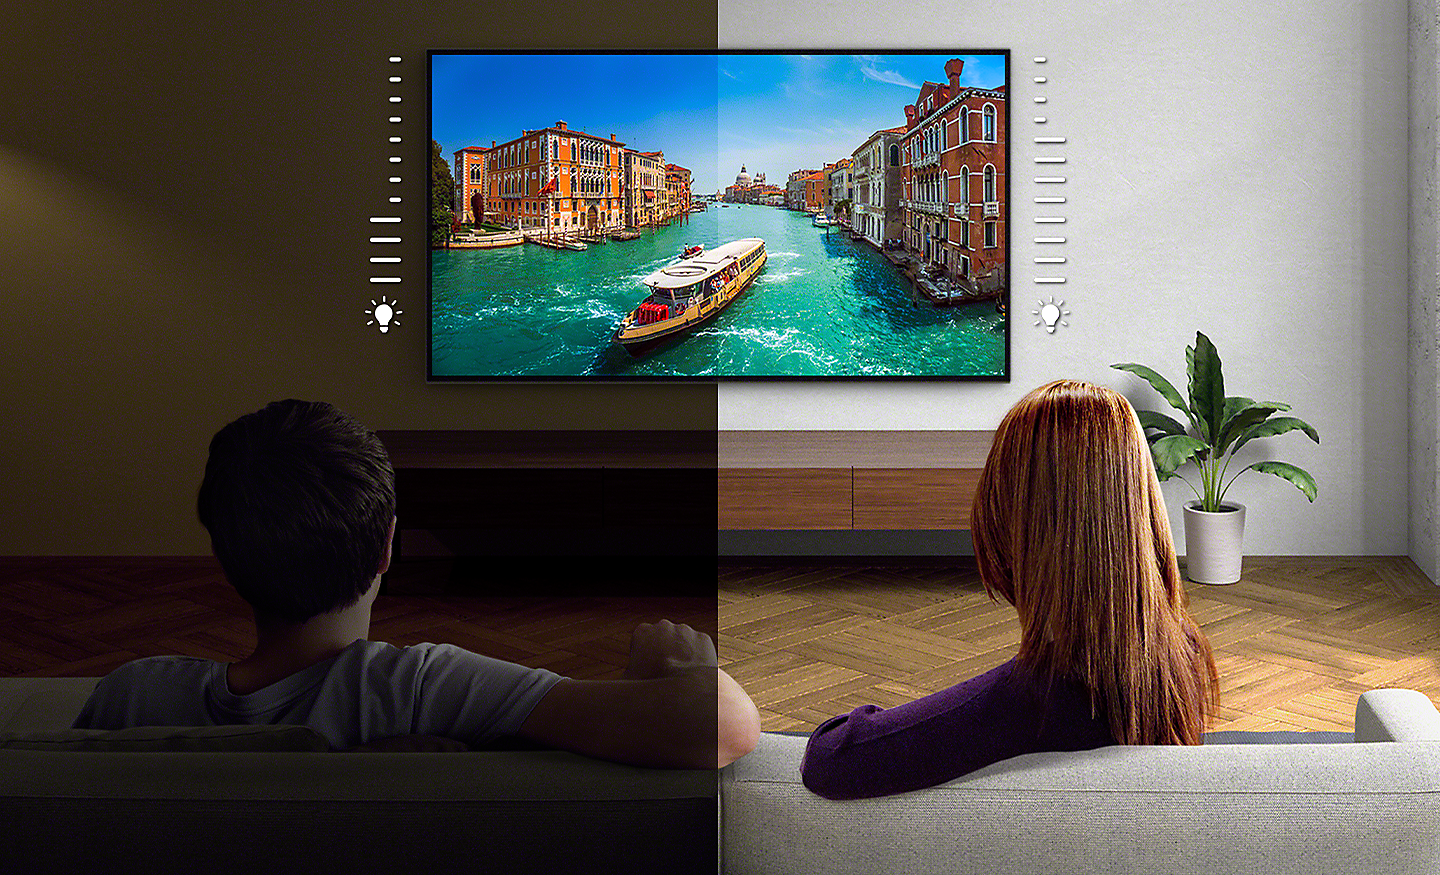 Split screen image of a couple watching TV - the left side is darker than the right